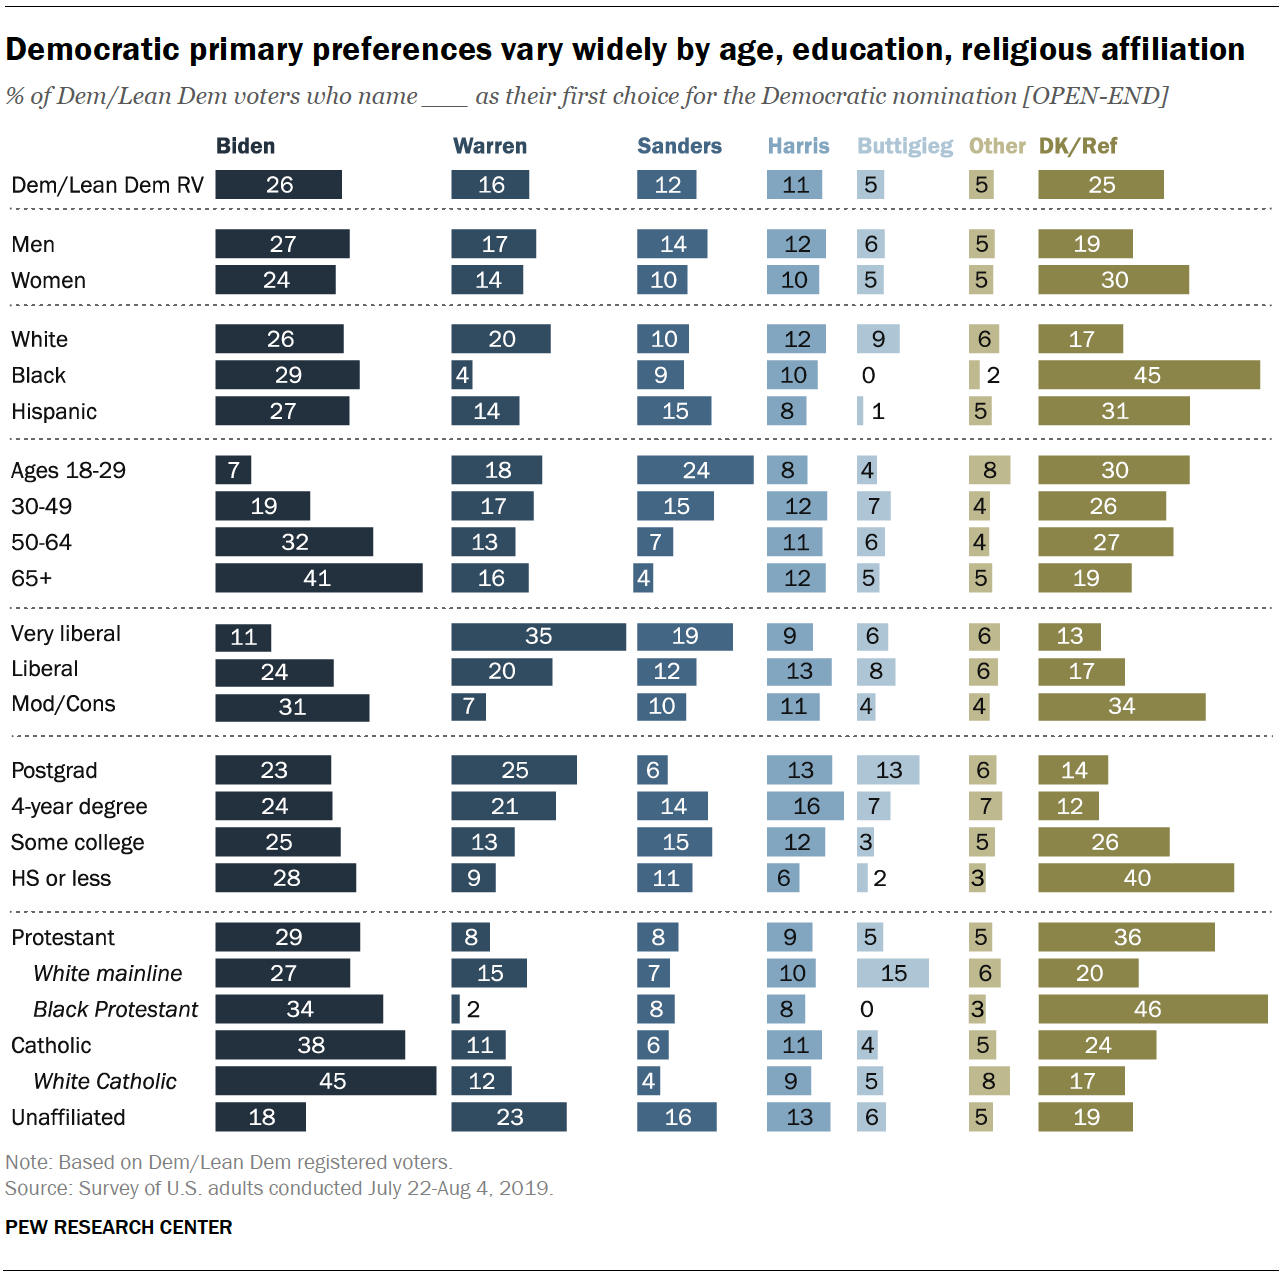 Democratic primary preferences vary widely by age, education, and religious affiliation